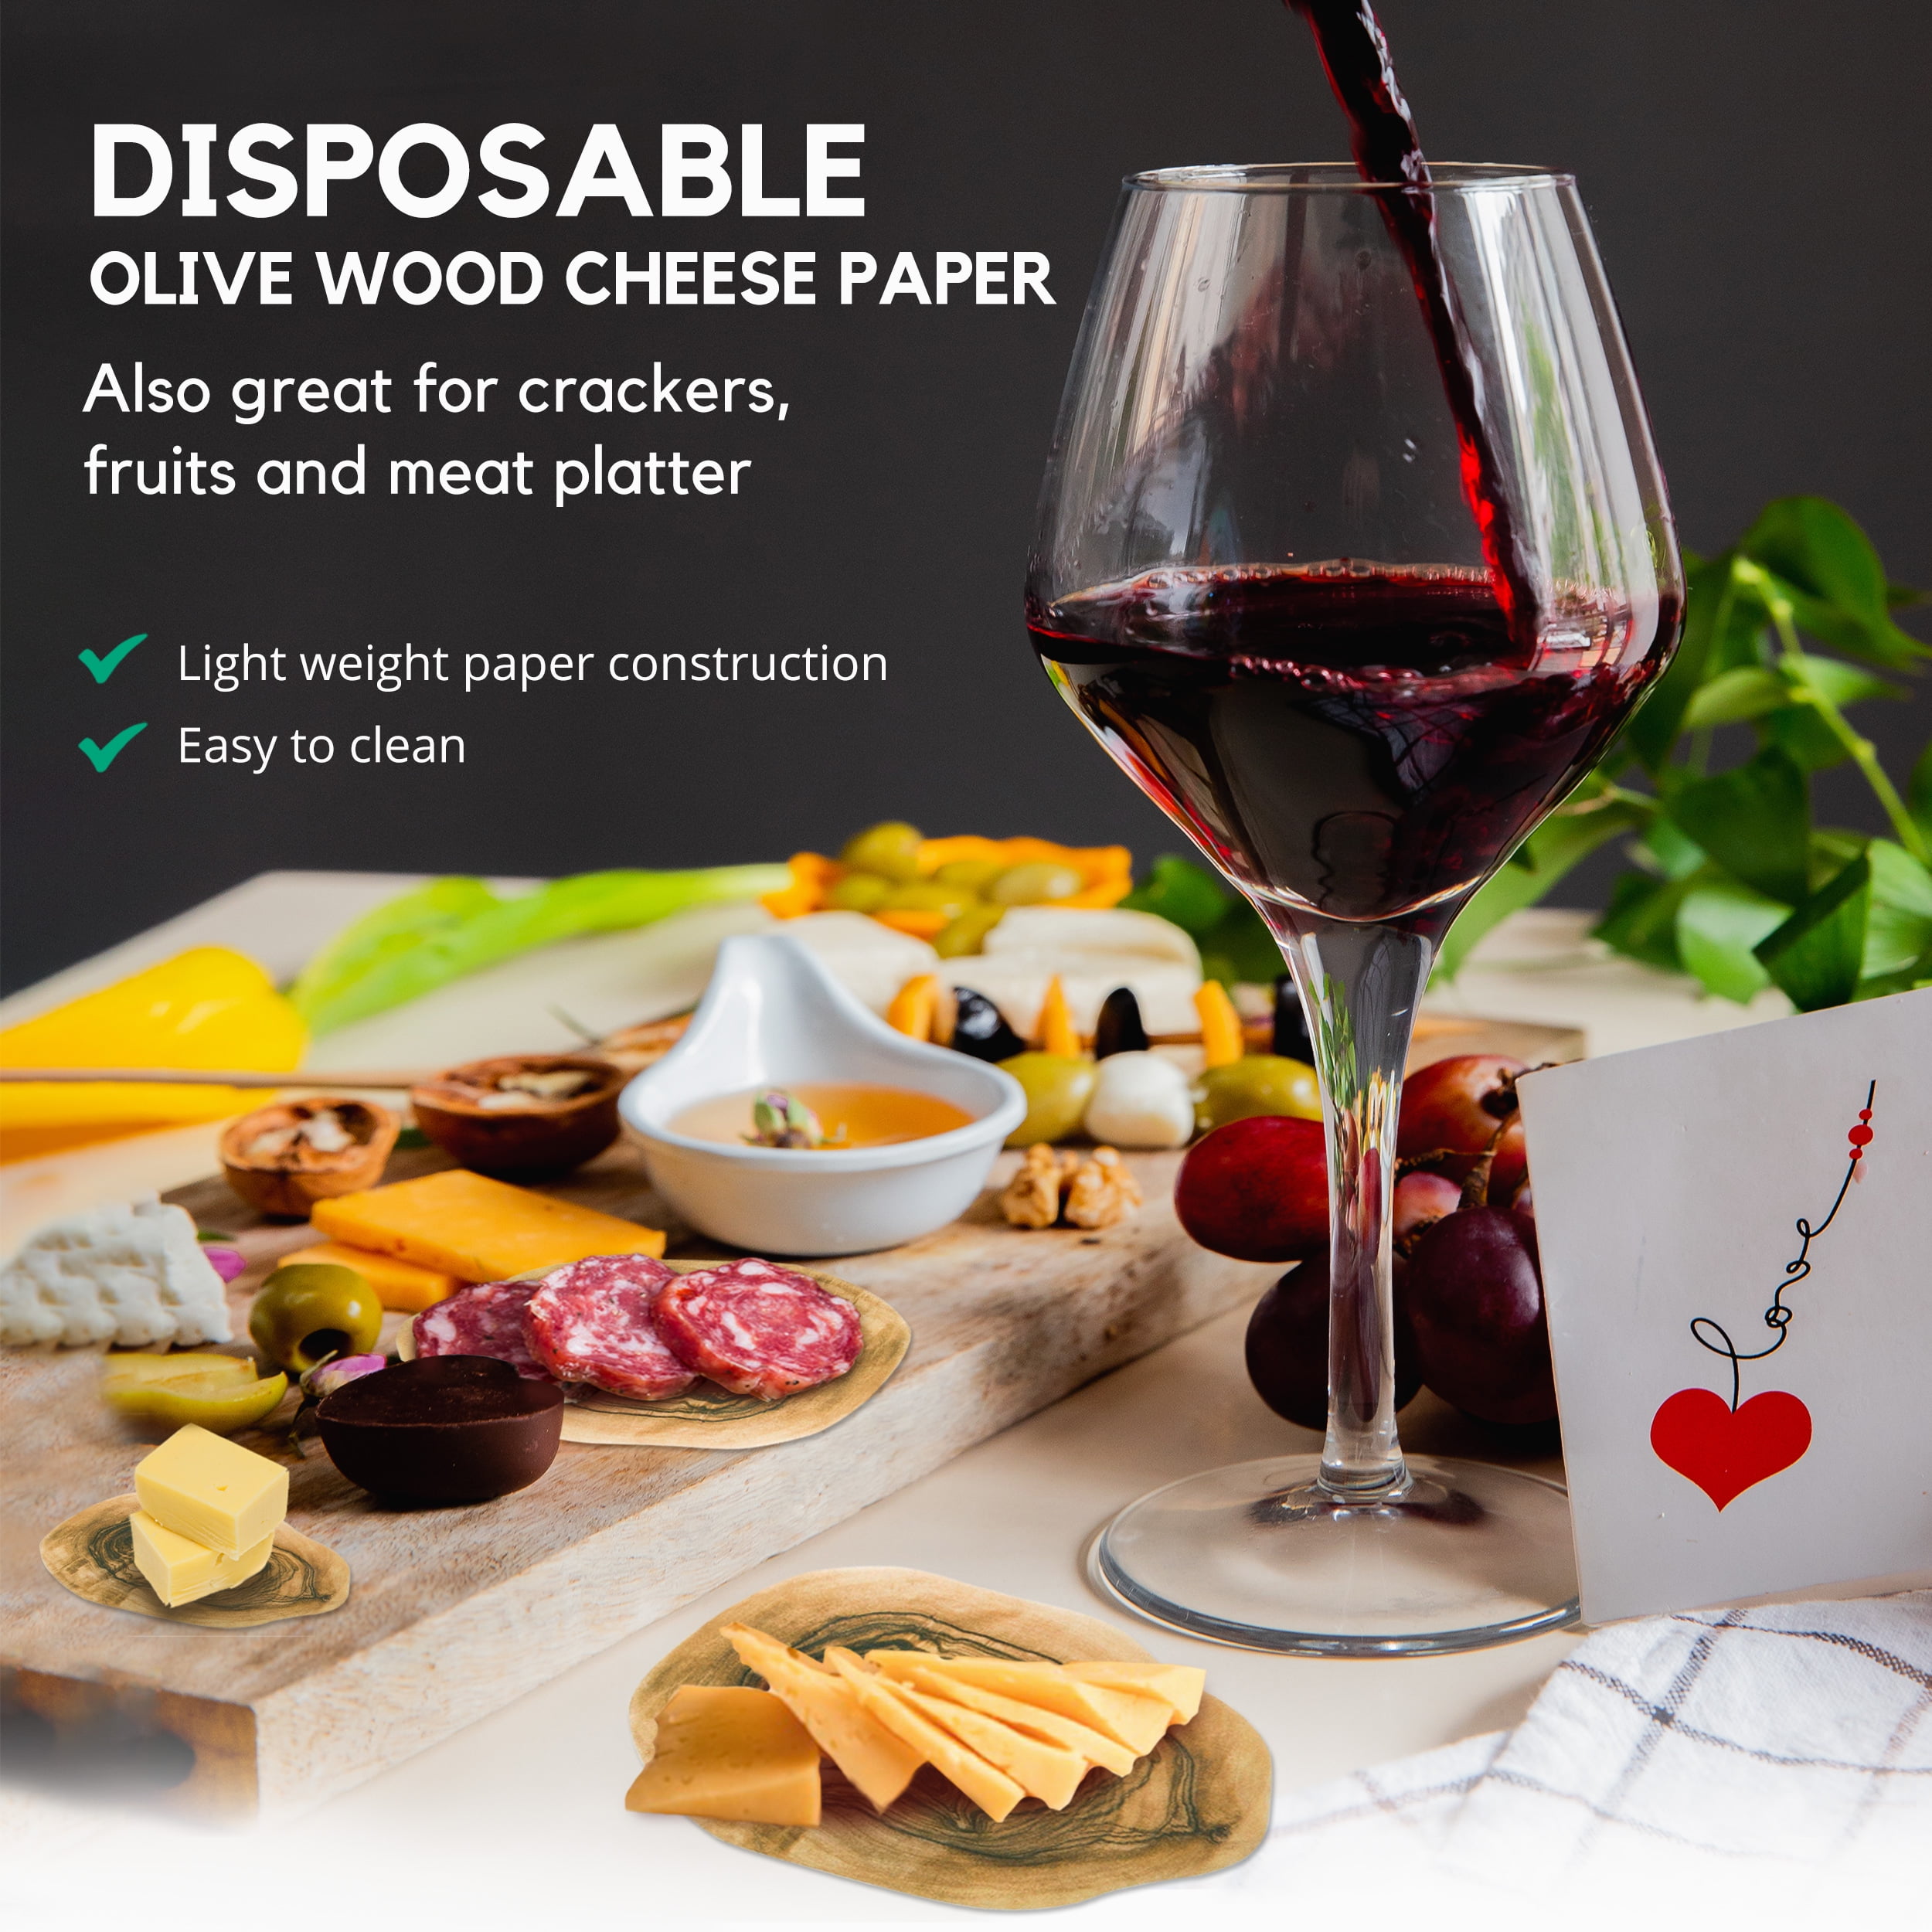 36 Pack] Leaf Cheese Paper for Charcuterie Boards - 3  Sizes Cheeseboard Accessories, Disposable Grease Resistant Decorative  Parchment Sheets in Serving Tray, Crackers, Fruits, Sushi Meat Platter 